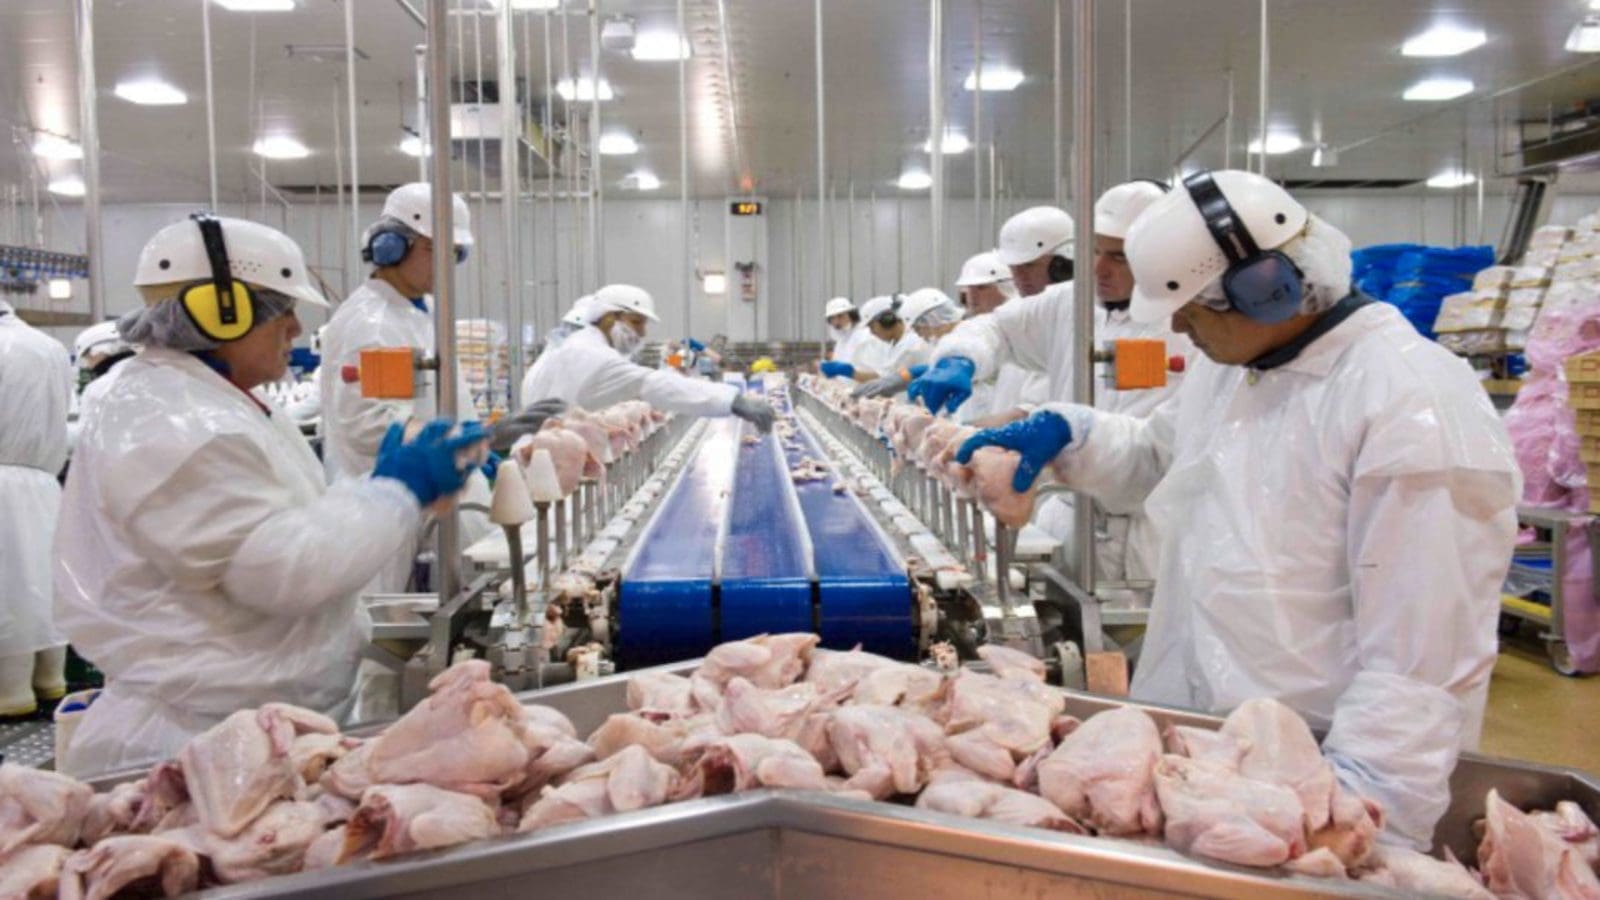 Tyson, Perdue face federal investigation over child labor allegations in slaughterhouses